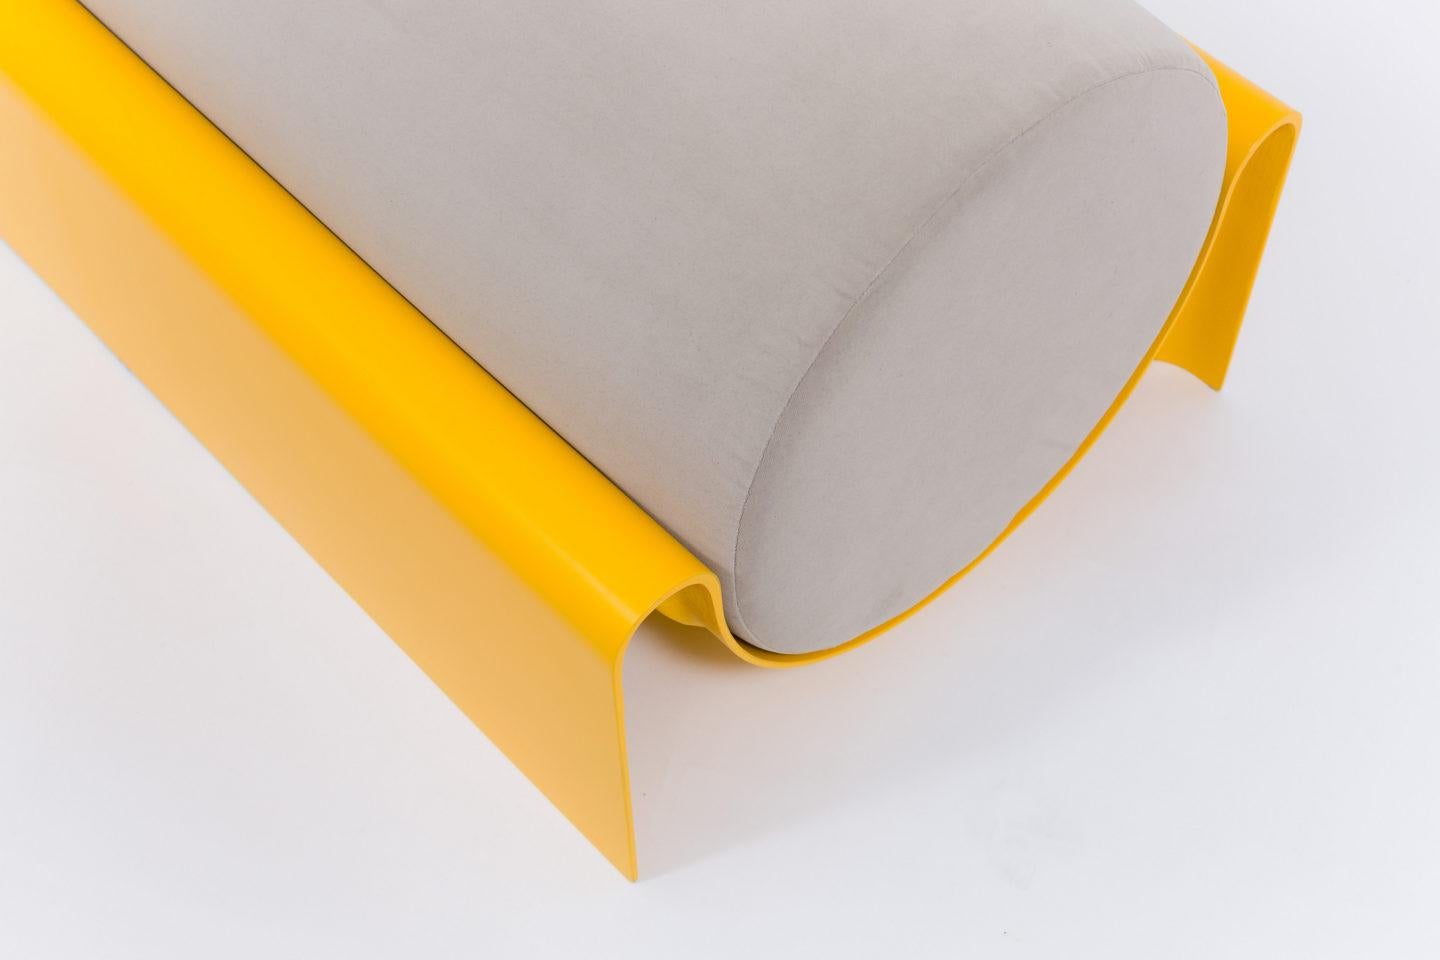 The sculptural monitor bench is a strong centre piece for a lobby, a graphic ending to a master bed, or a playful seating to punctuate an entry or courtyard. Available in a variety of colors and fabrics the monitor bench can be adapted for both